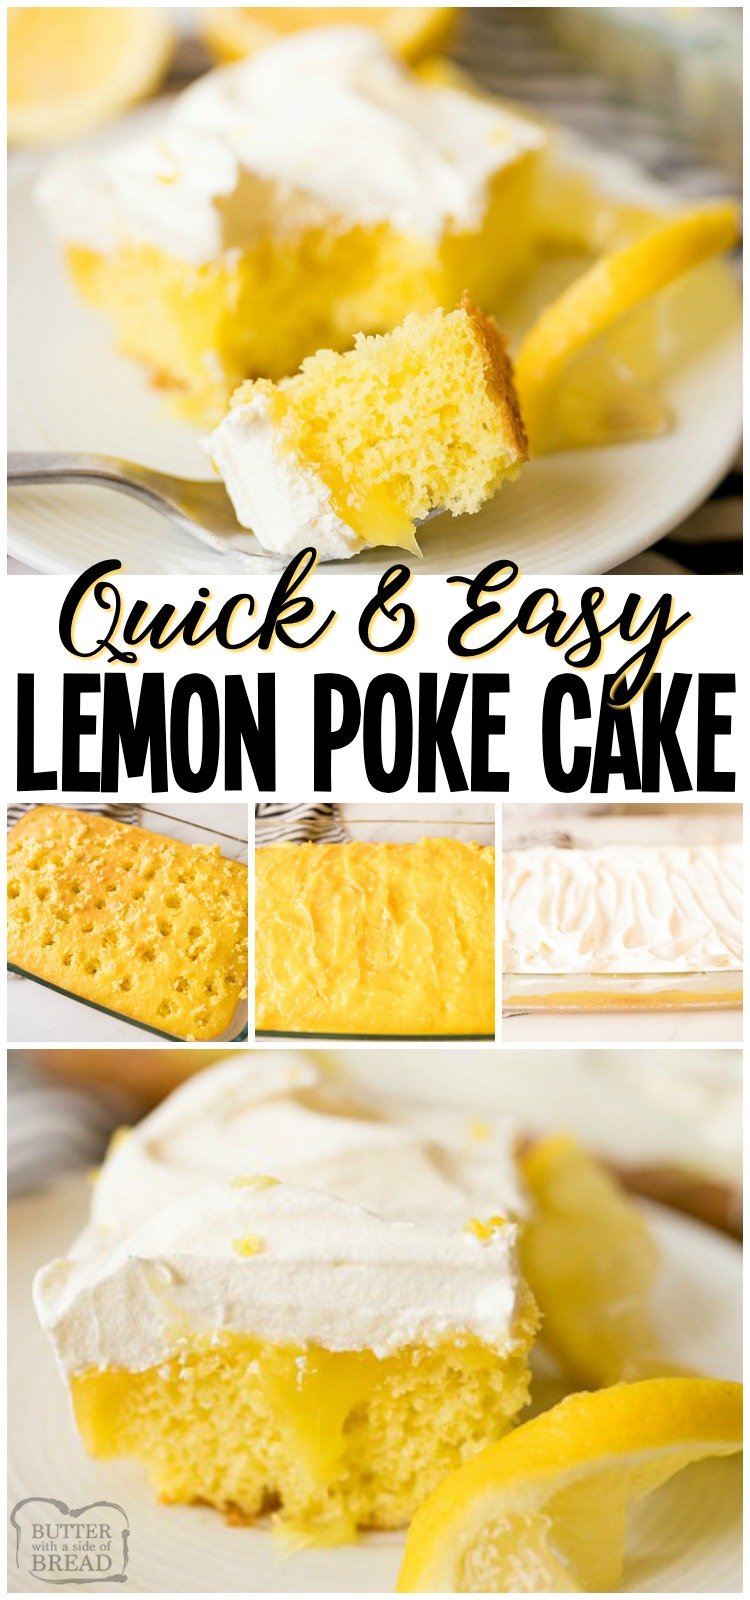 Lemon Poke Cake made with few ingredients and so simple! Delicious, easy poke cake recipe with a bright lemon flavor topped with sweet cream.